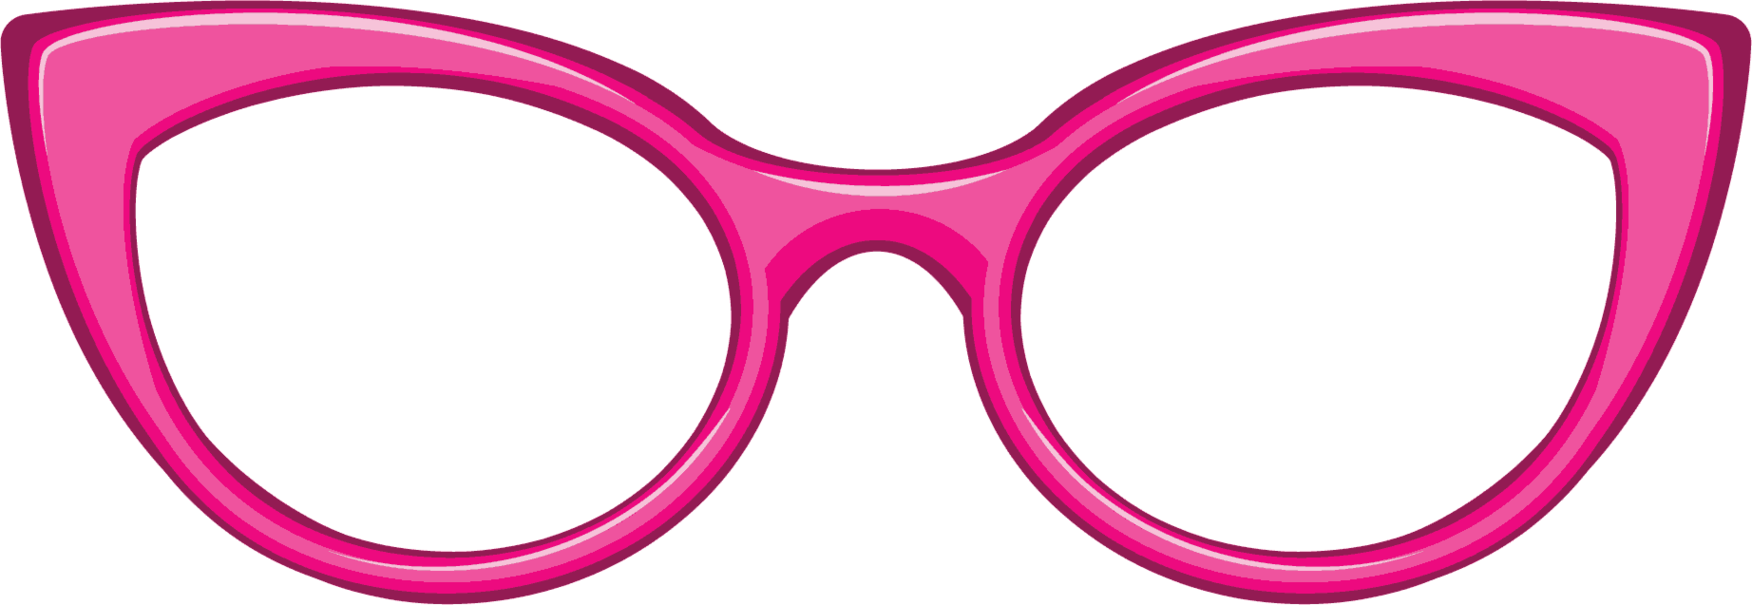 Glasses Vector Clipart - Free to use Clip Art Resource